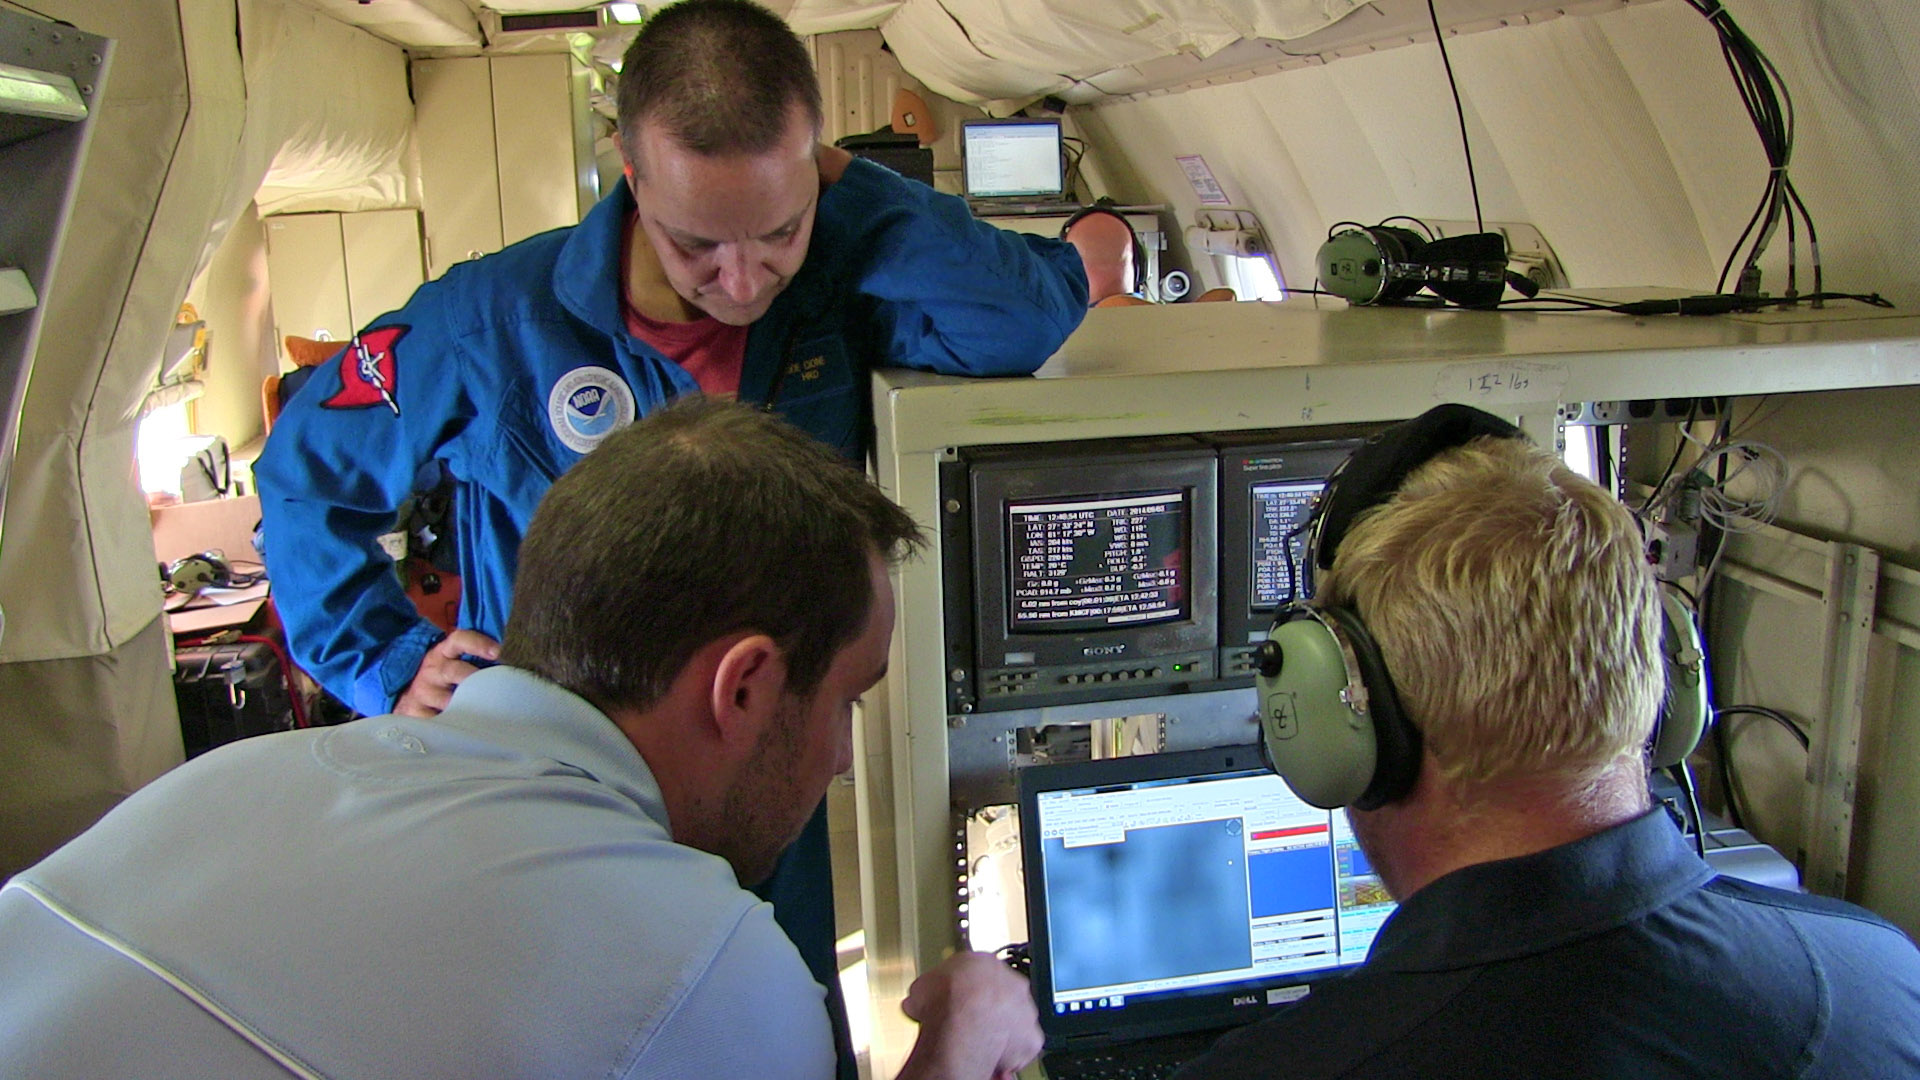 The crew monitors the in-flight Coyote UAS from the piloting station on the P3.